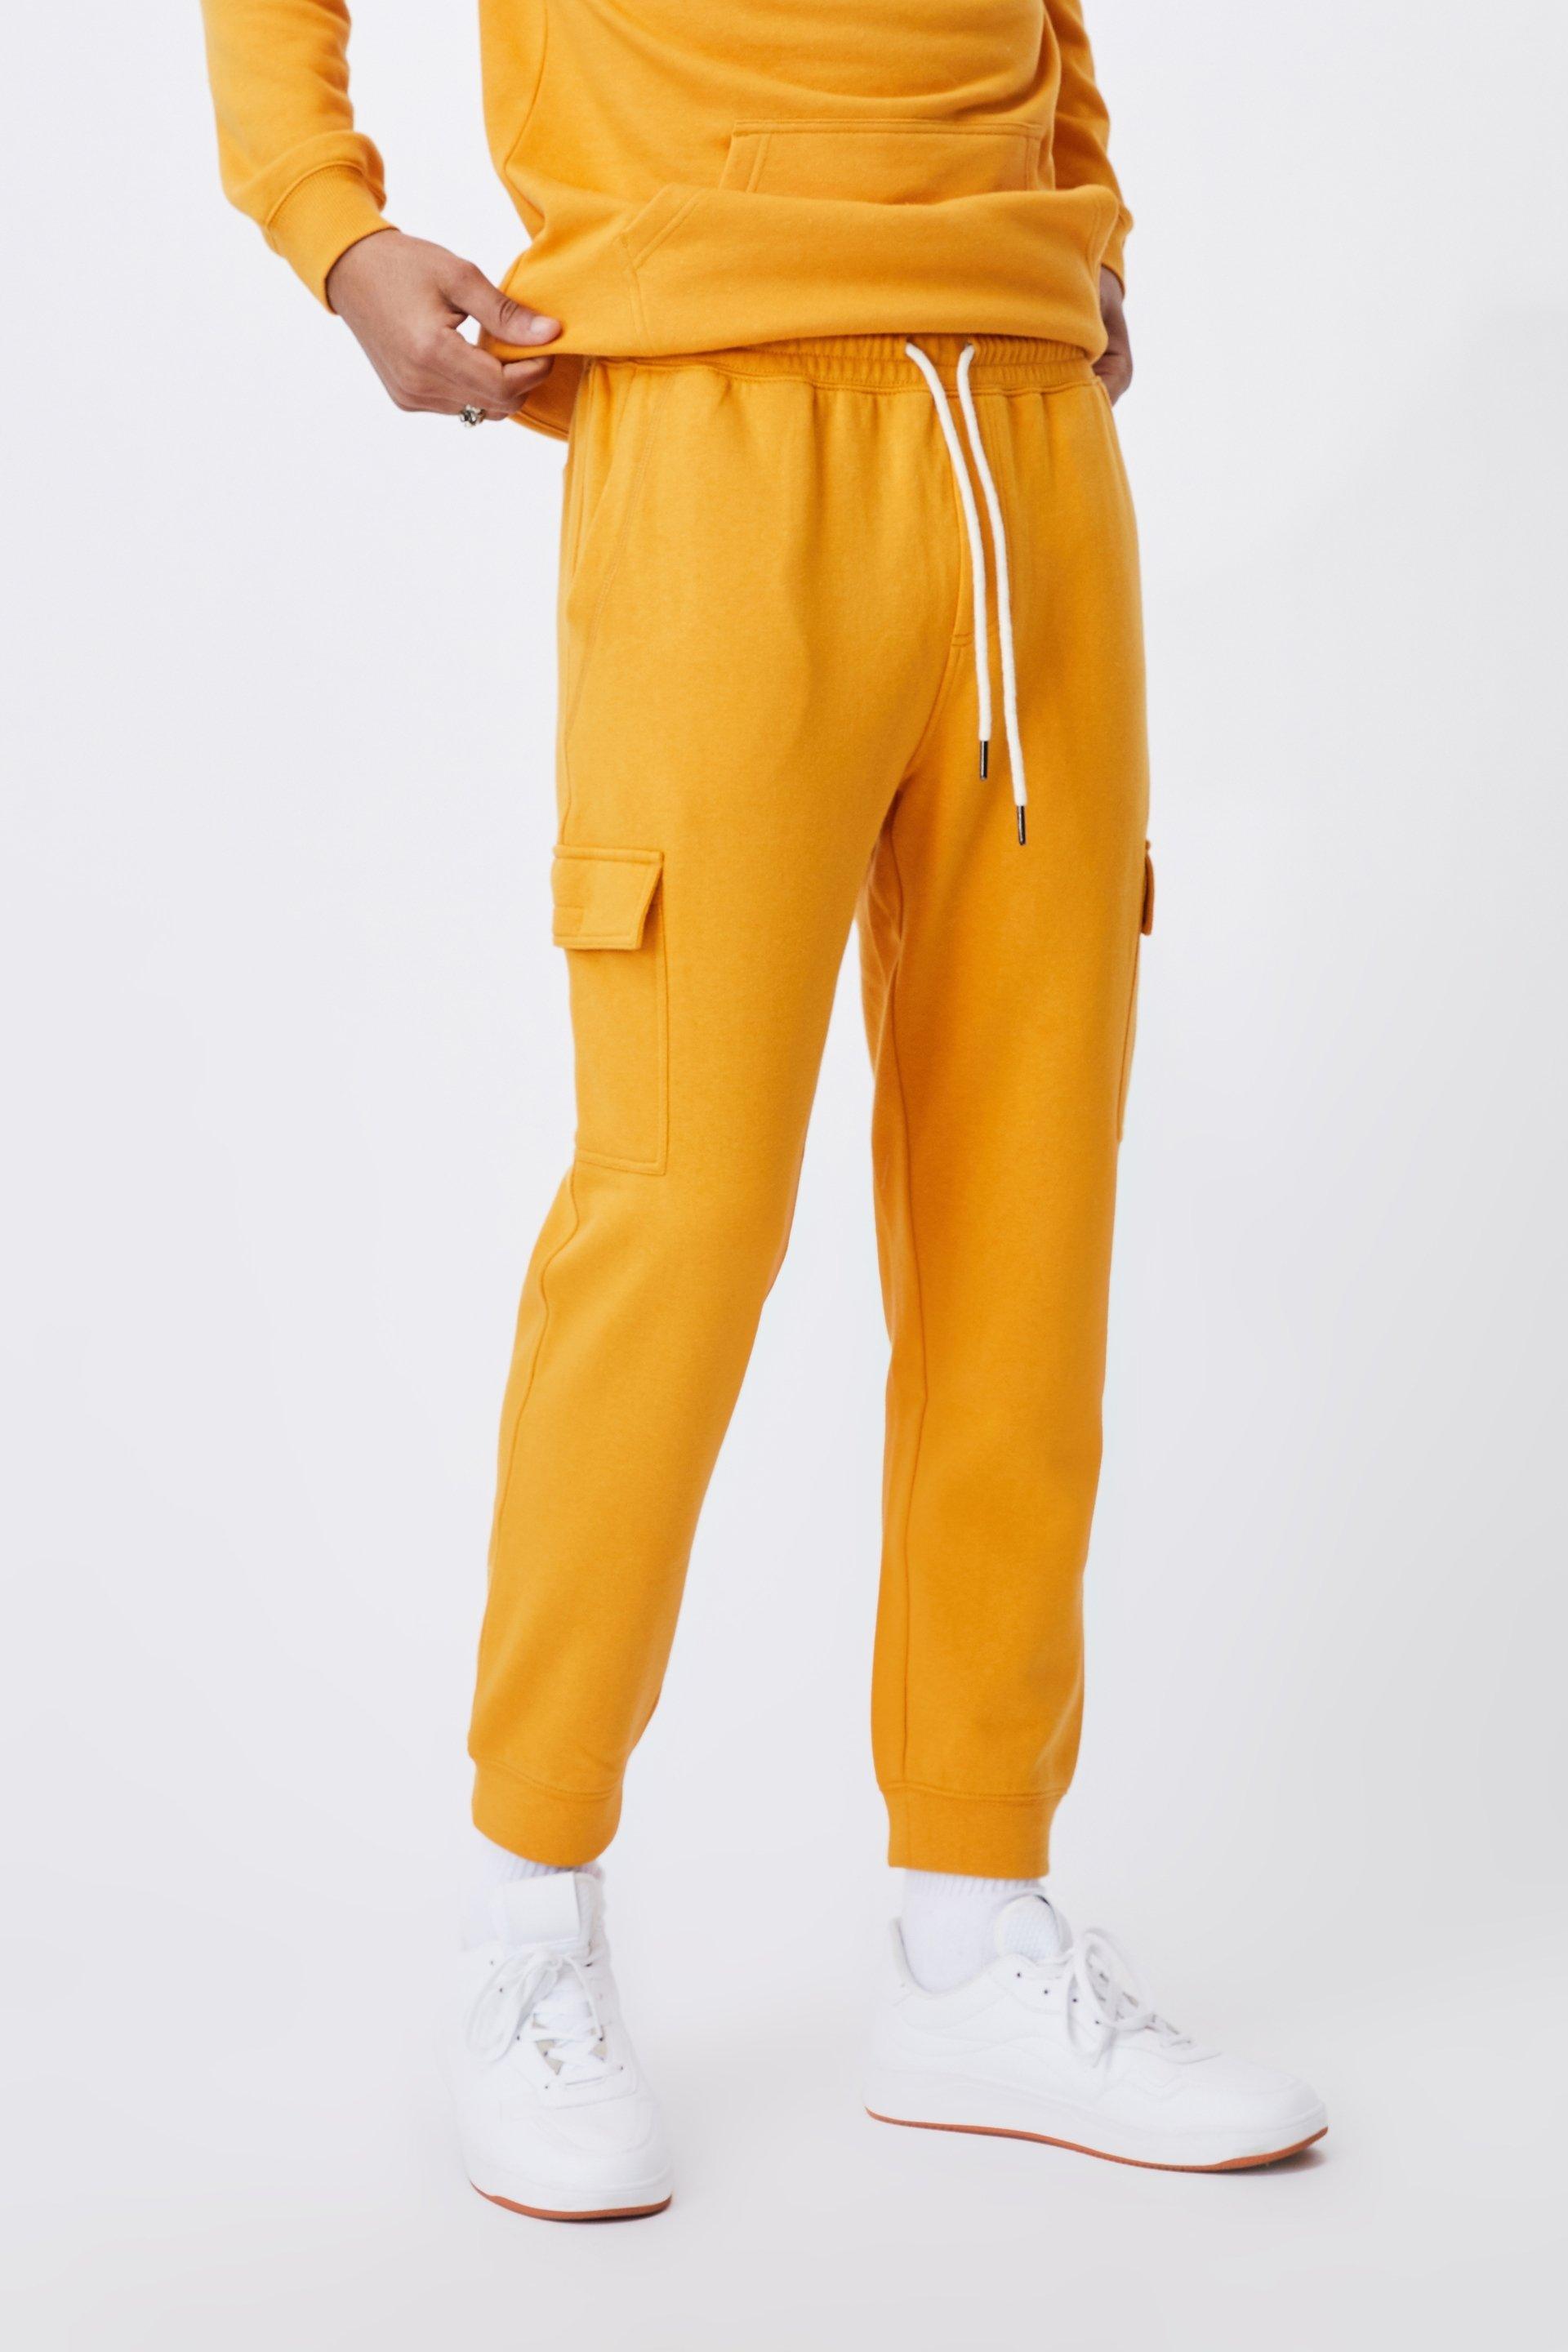 Trippy slim trackie cargo - yellow Cotton On Pants & Chinos ...